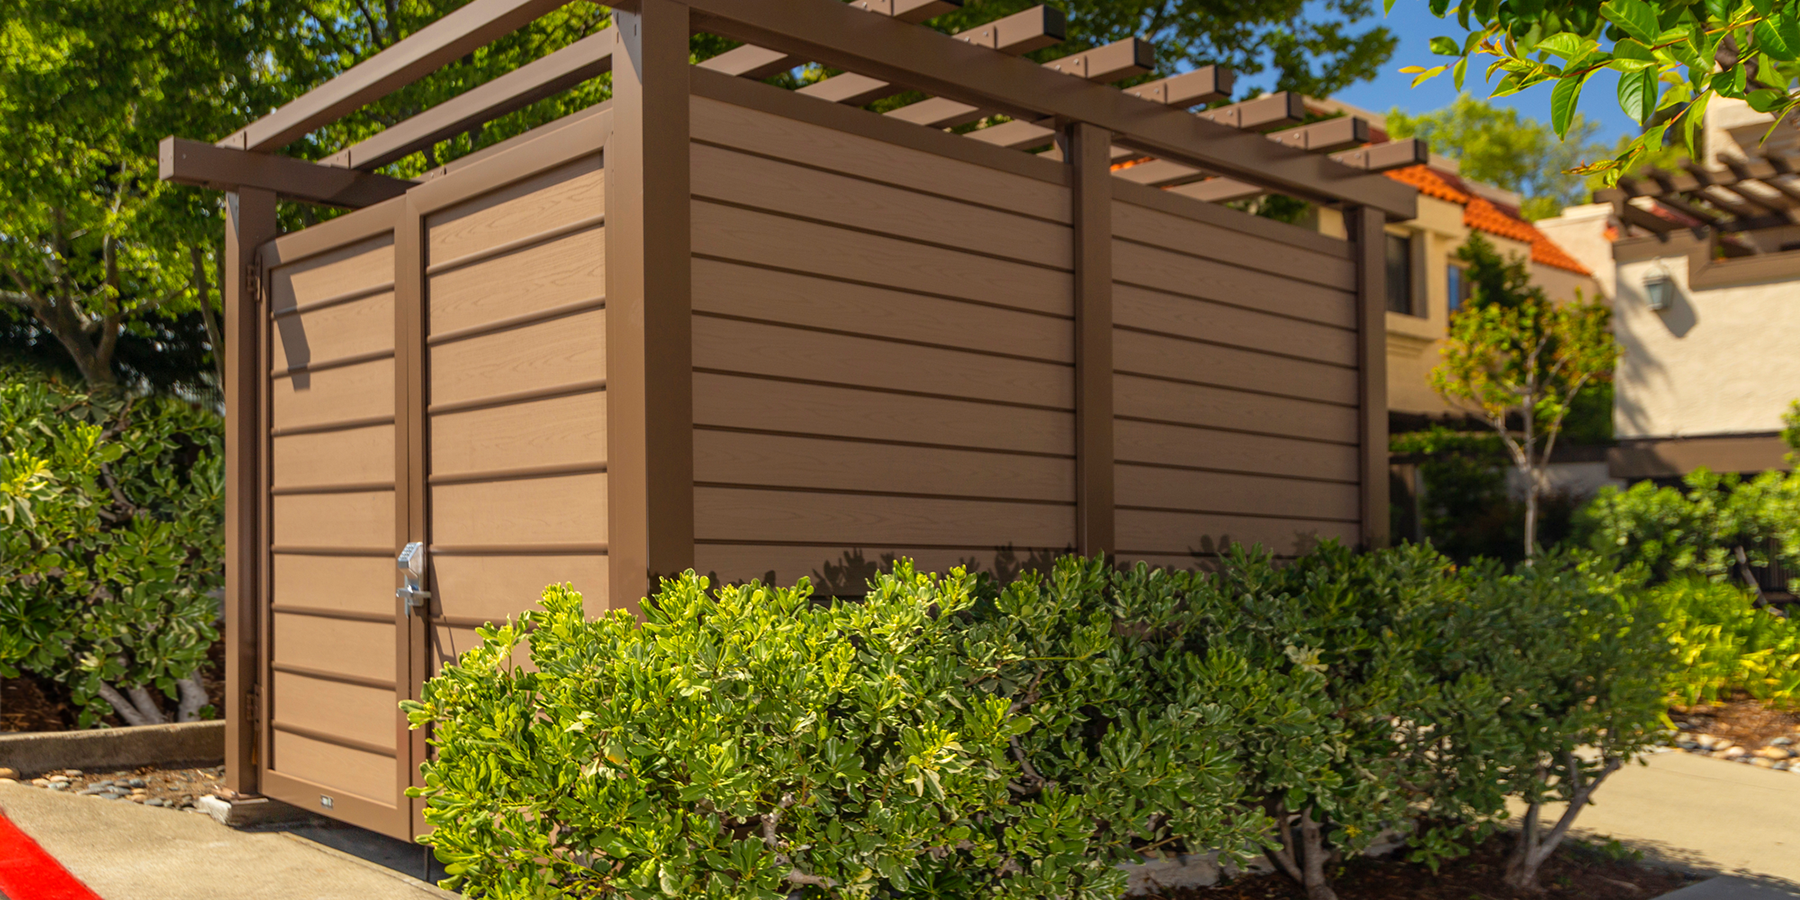 5 ways to improve the look and effectiveness of your dumpster enclosure